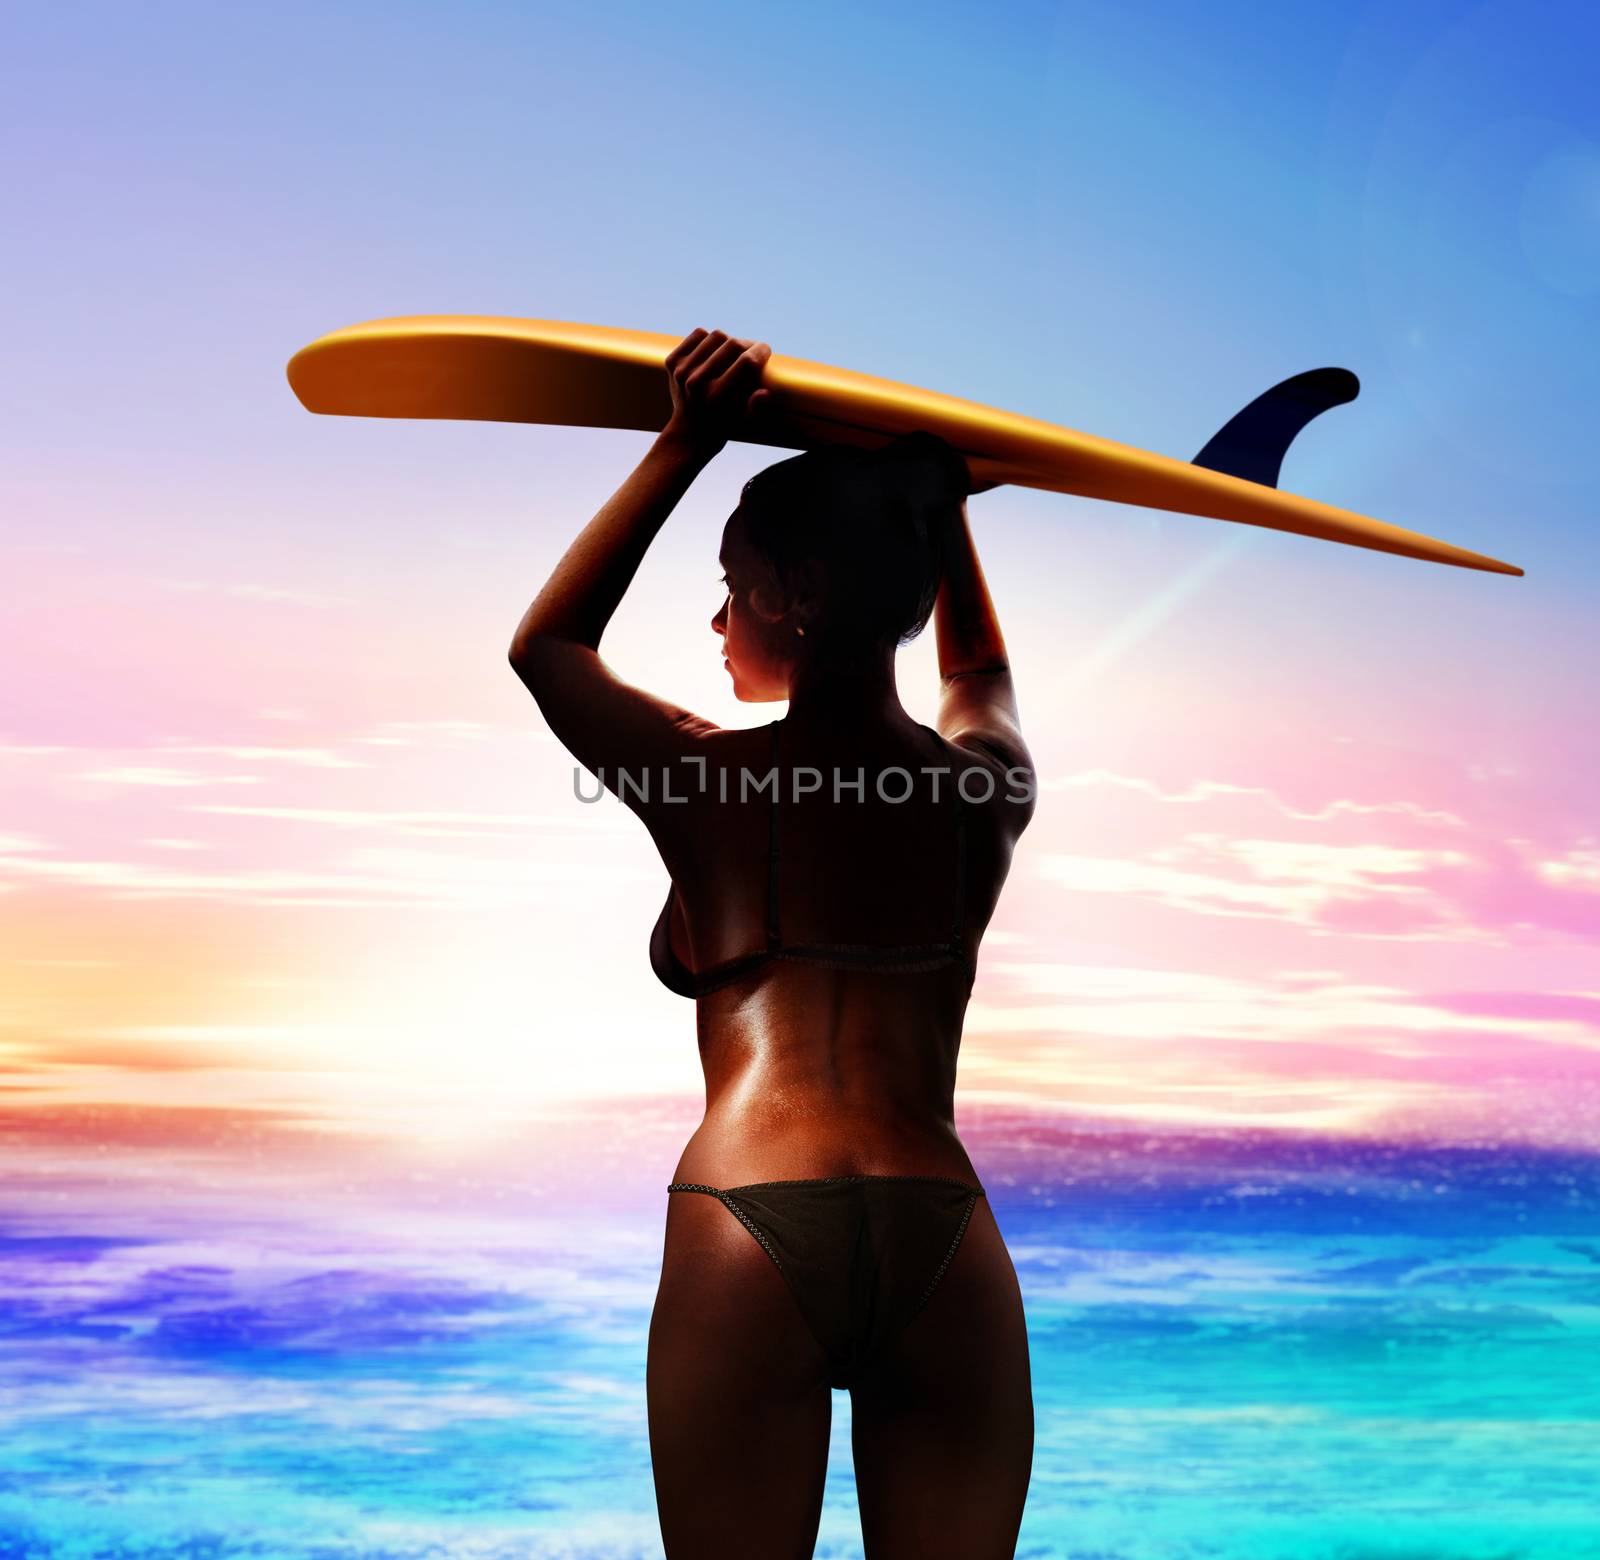 surfer with surfboard at sunrise by ssuaphoto